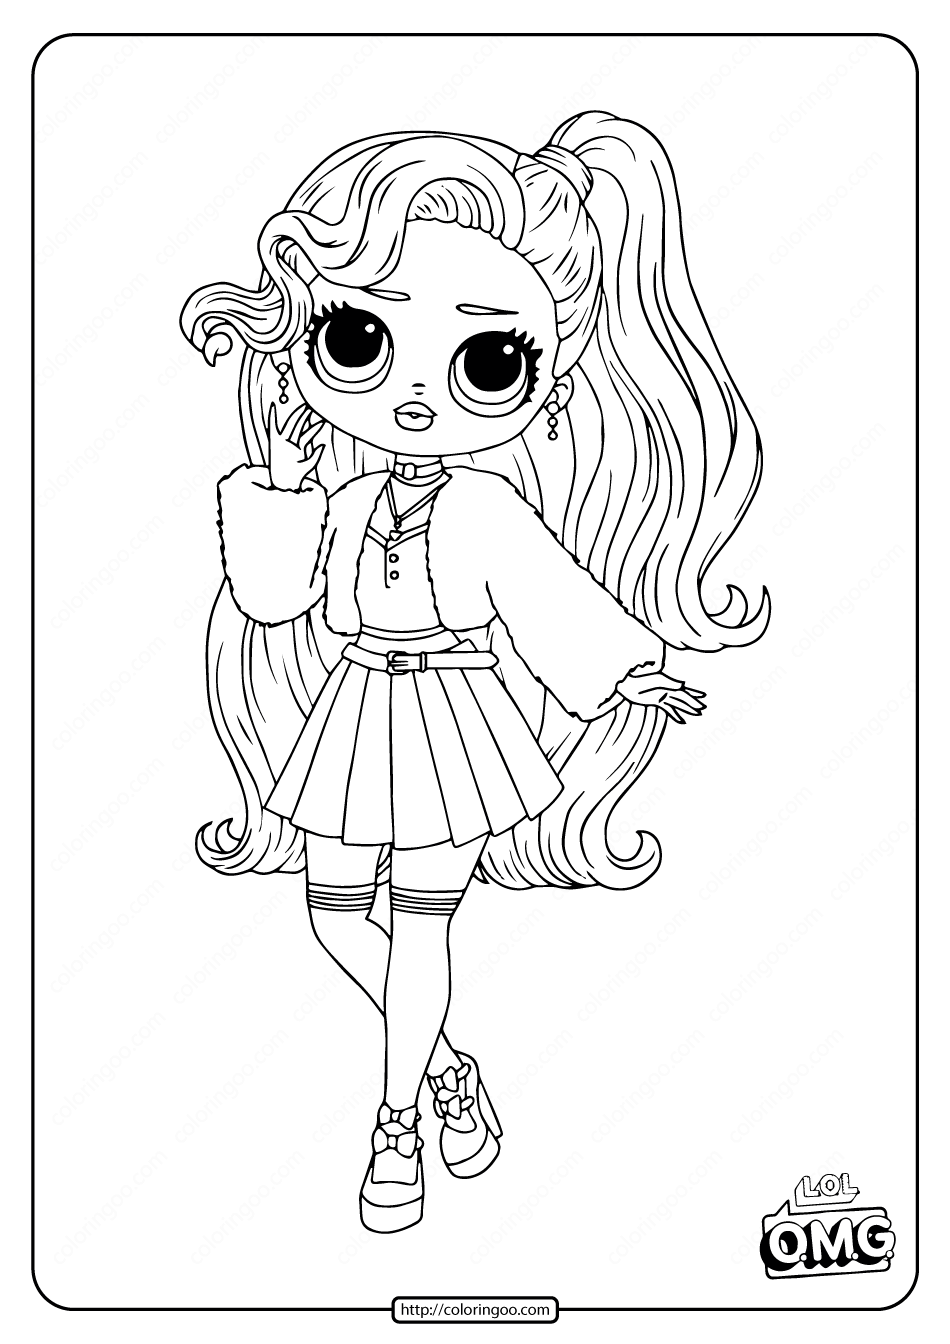 LOL Surprise OMG Pink Baby Coloring Page In 20   Baby Coloring ...